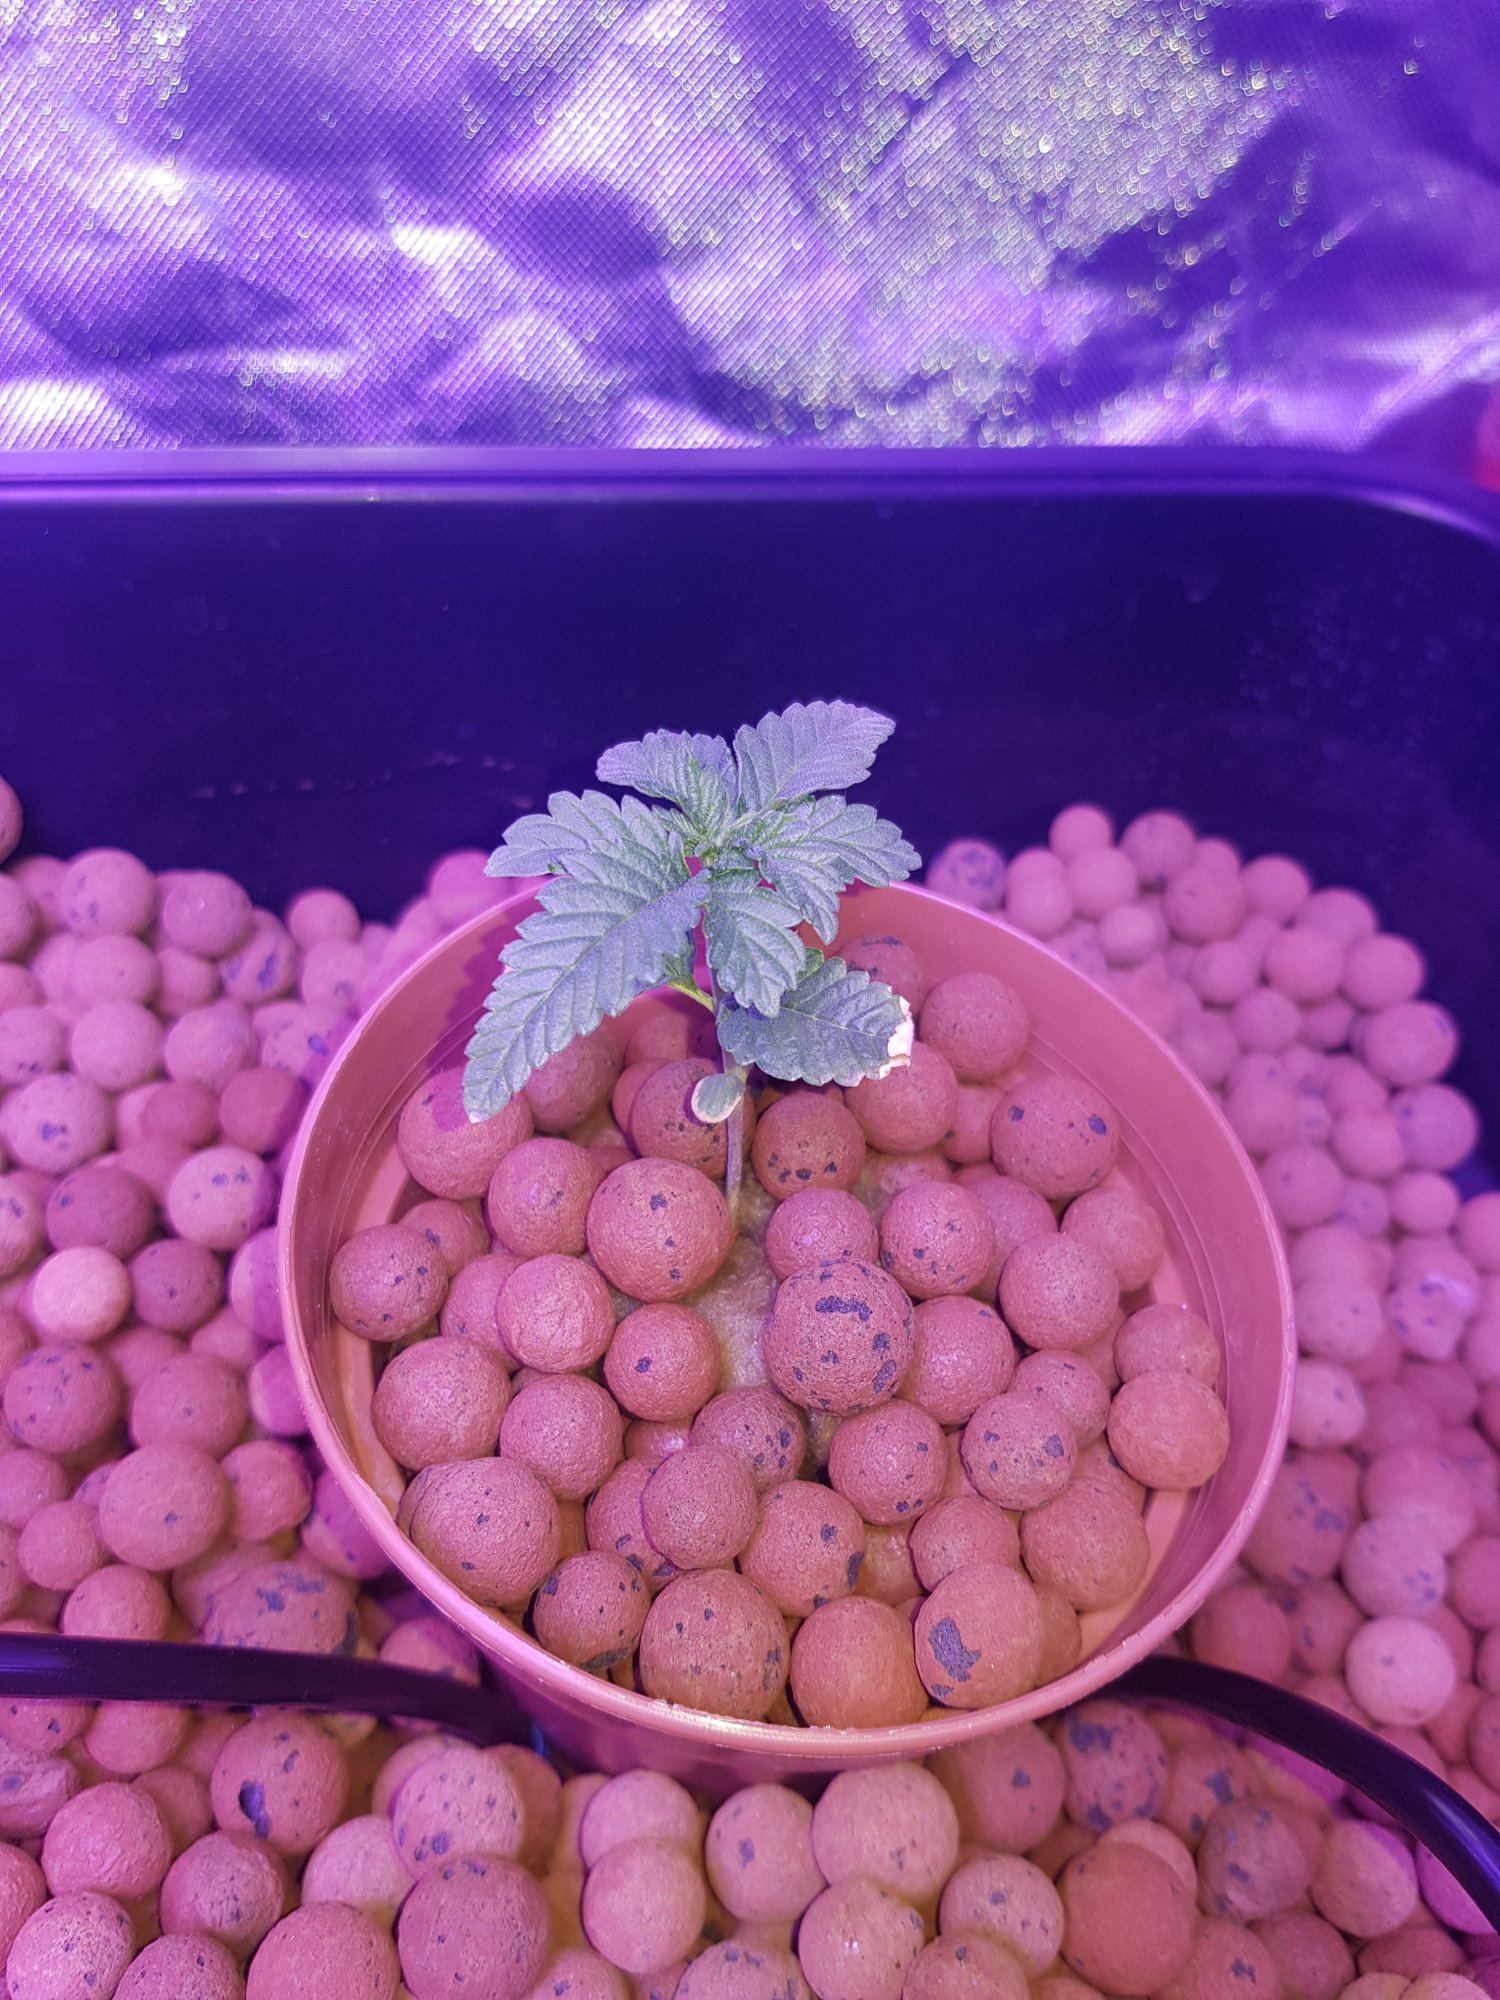 first-time-hydro-already-lost-one-seedling-need-help-asap.jpg